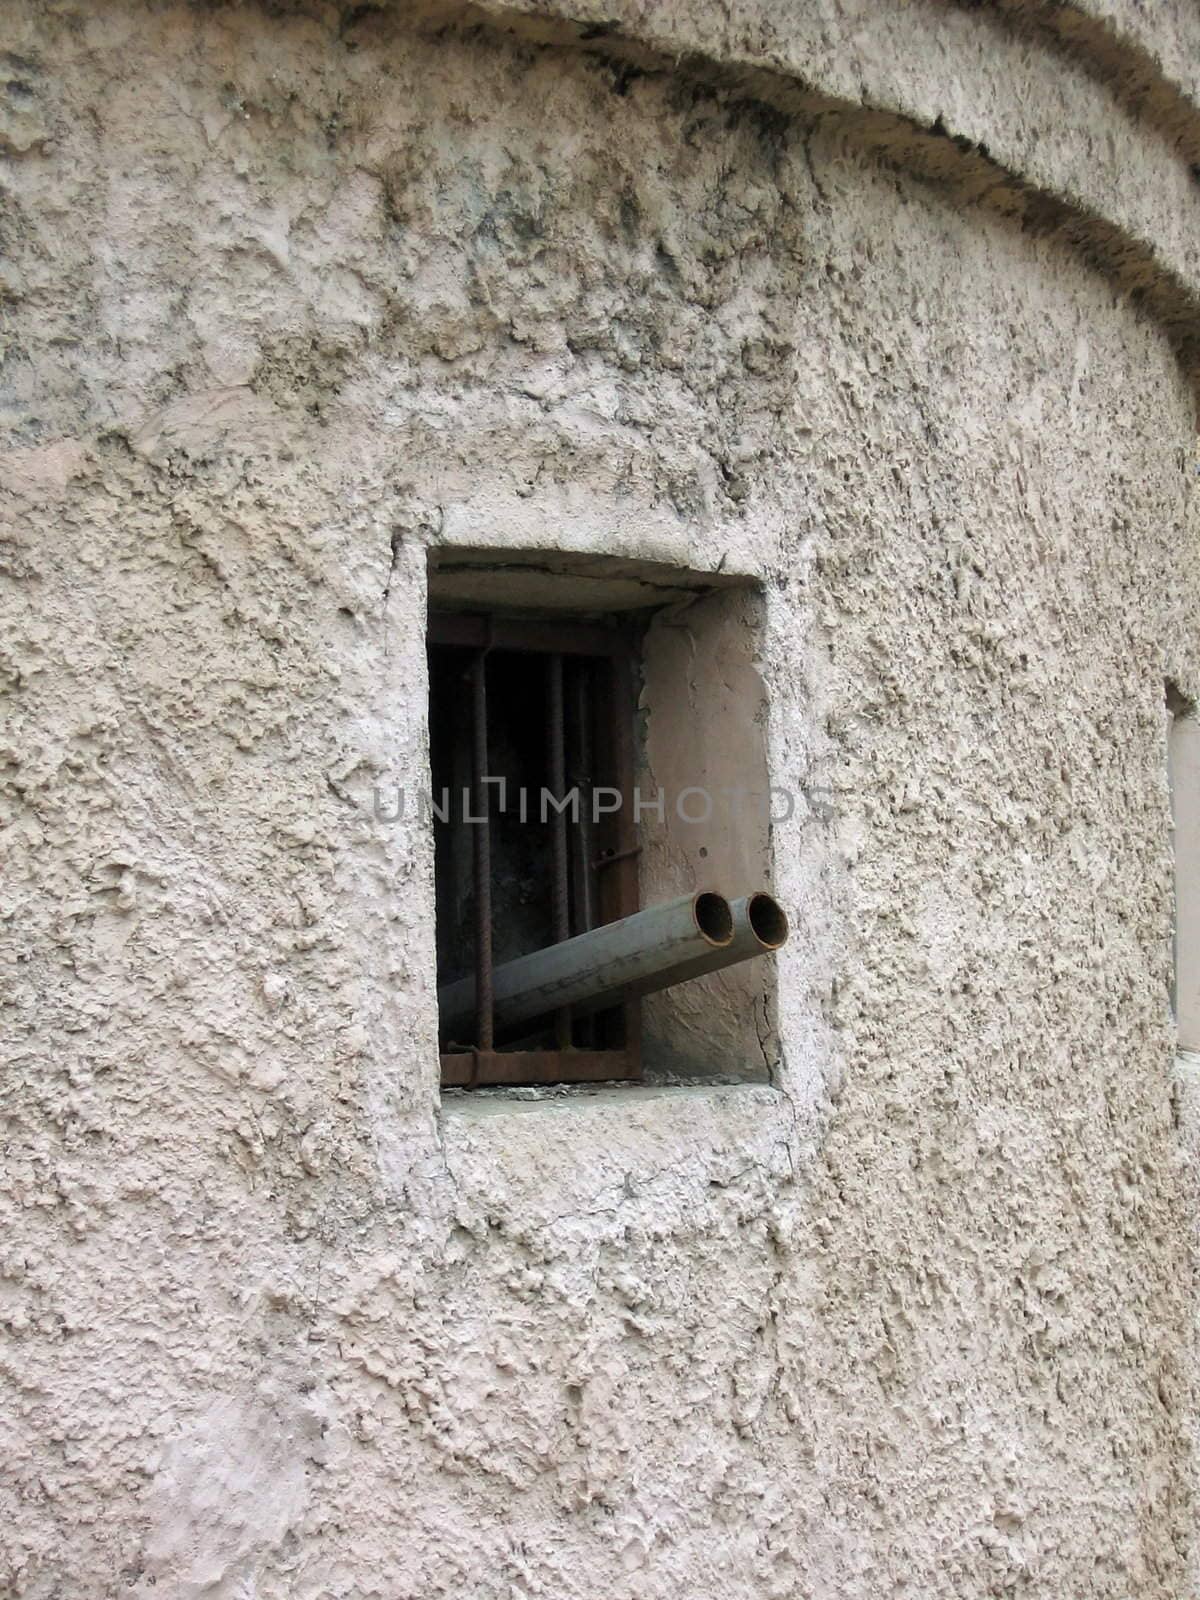 Gun is in the window of a stone fortress